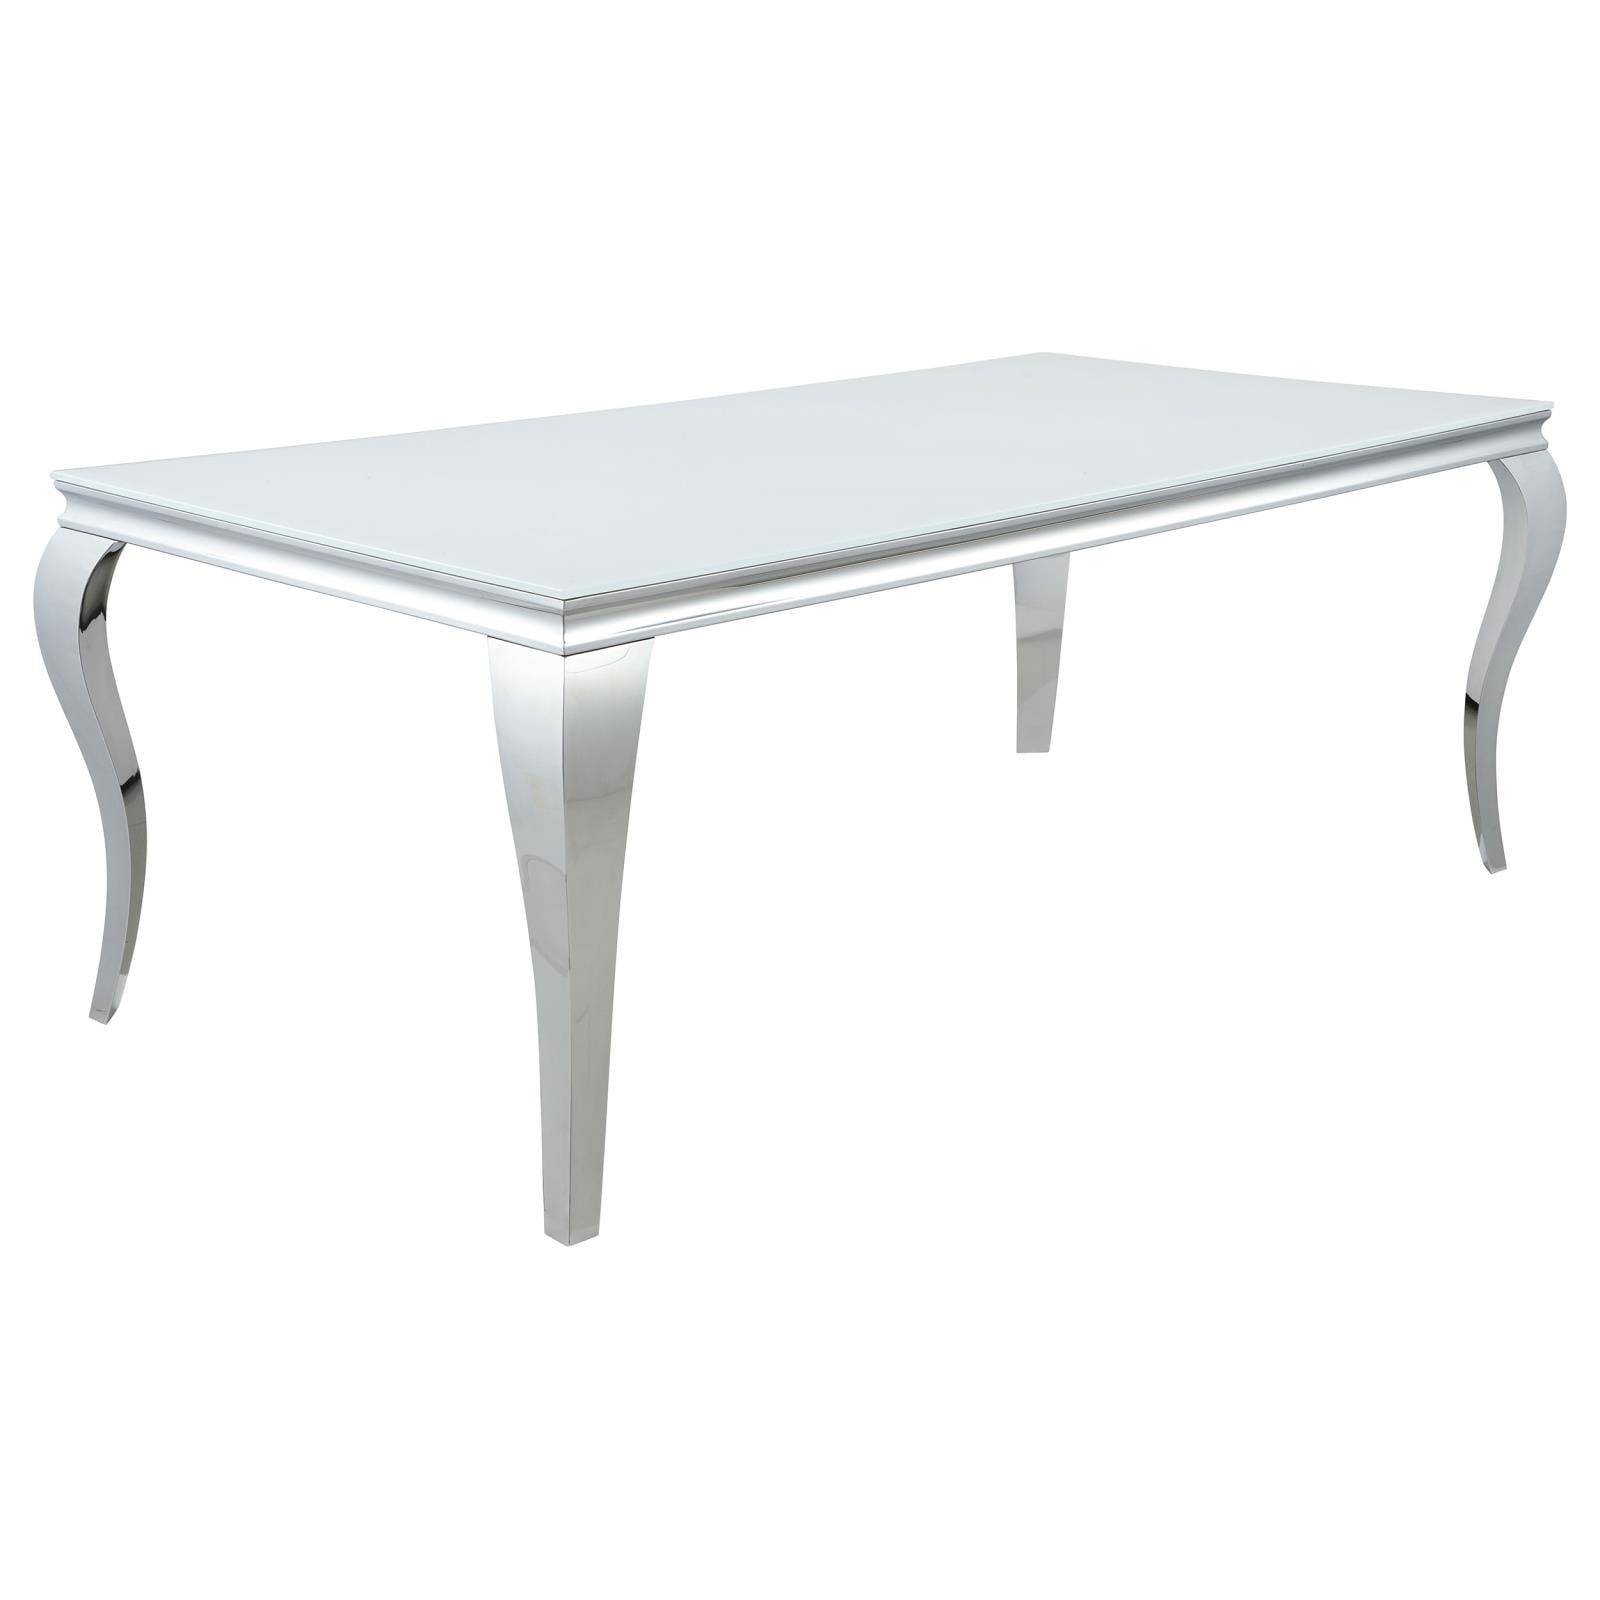 Elegant 41.5" x 80.75" Silver Glass Top Dining Table with Chrome Cabriole Legs